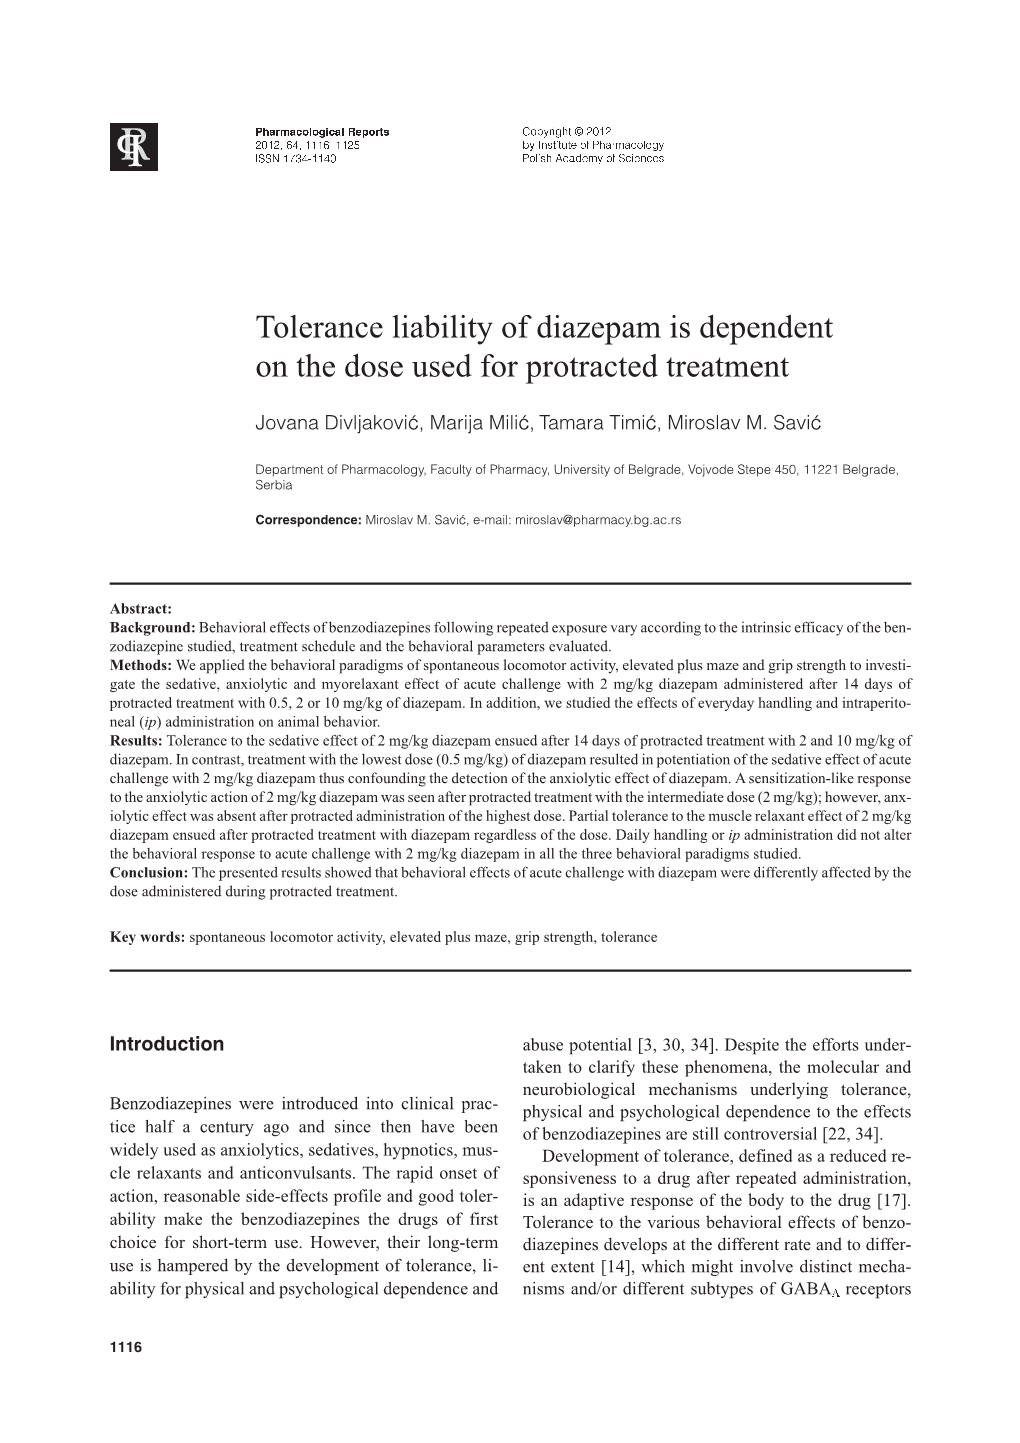 Tolerance Liability of Diazepam Is Dependent on the Dose Used For